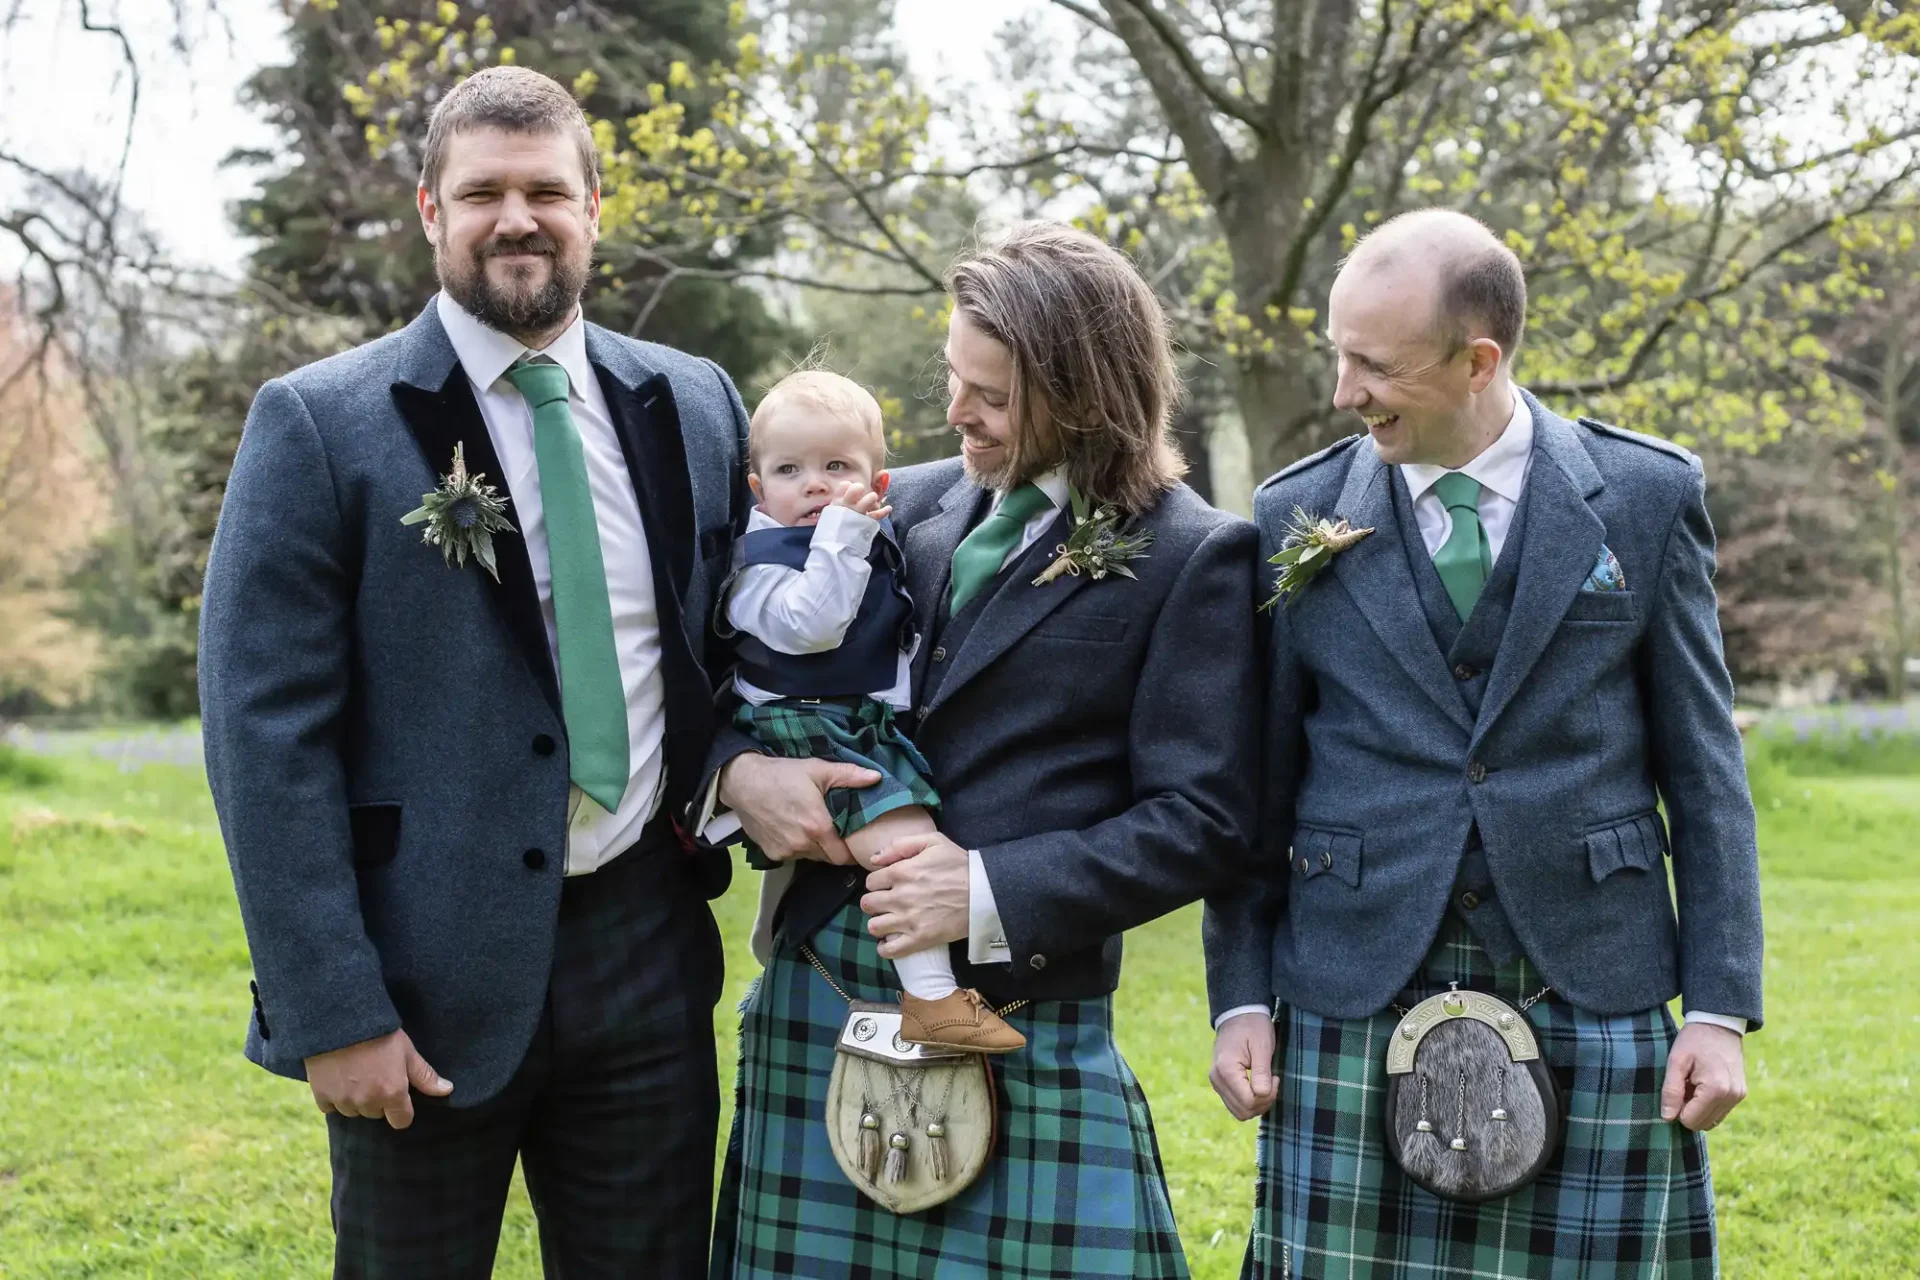 Three men and a baby, all dressed in kilts and matching green ties, standing outside on grass with trees in the background. The baby is being held by the man in the center.